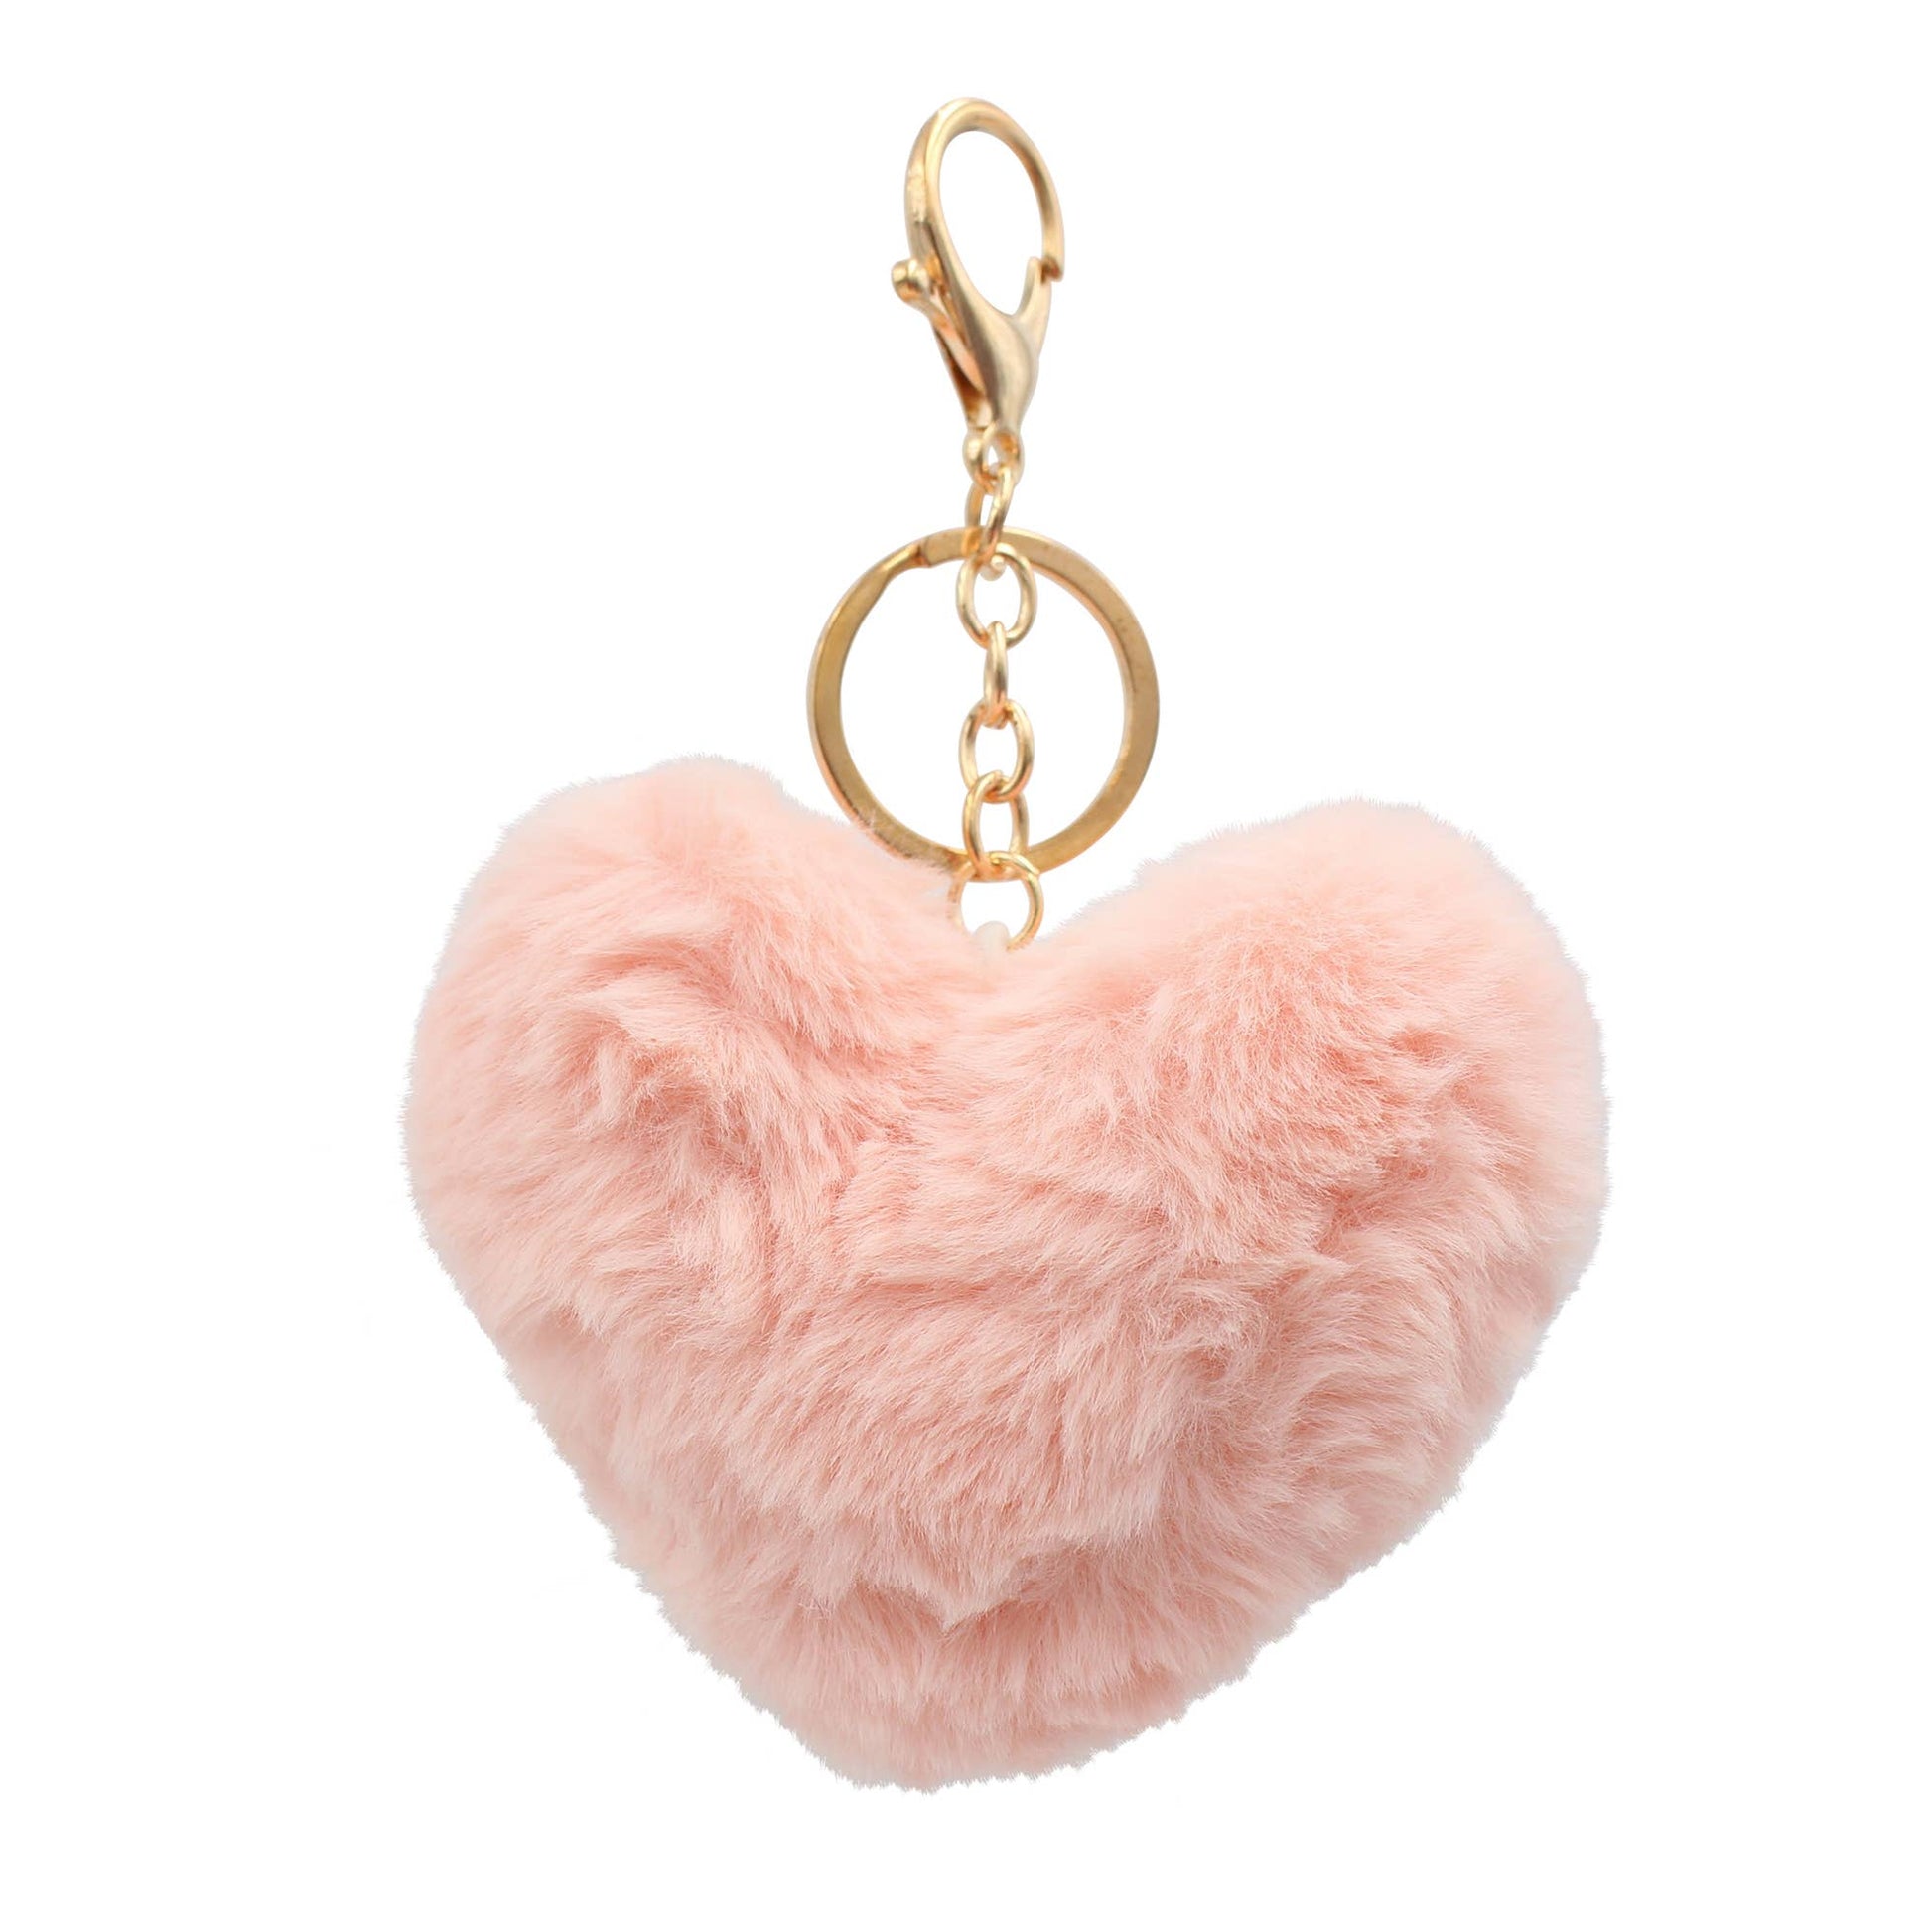 Image of Real Sic Light Pink Pom Pom Fuzzy  Heart Key Chain for girl's bag and purse